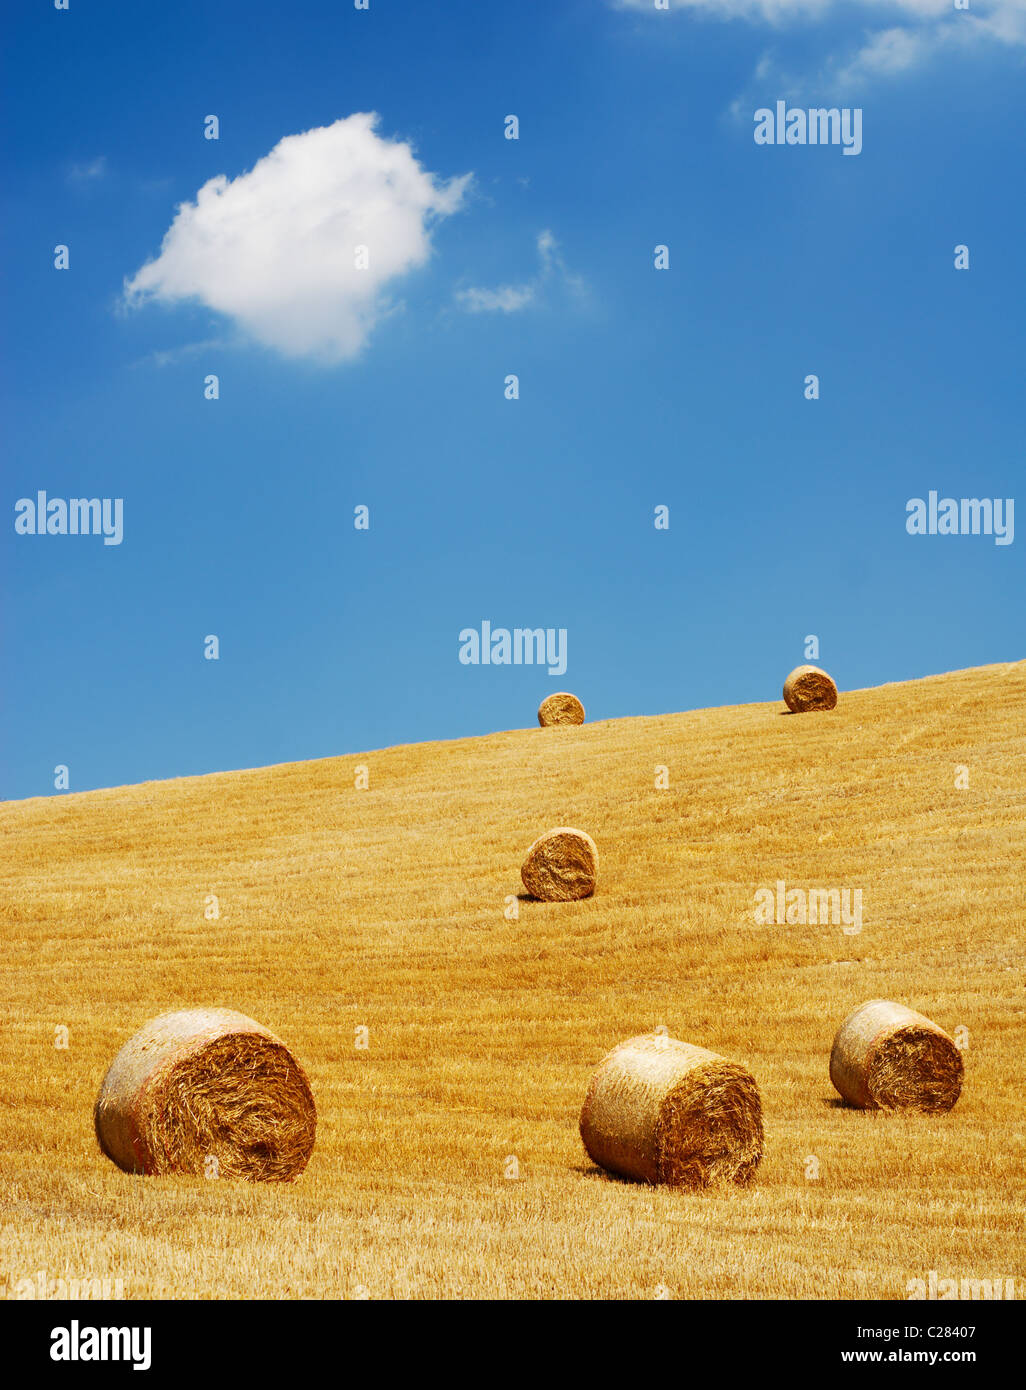 Golden straw bales in a field with bright blue sky Stock Photo